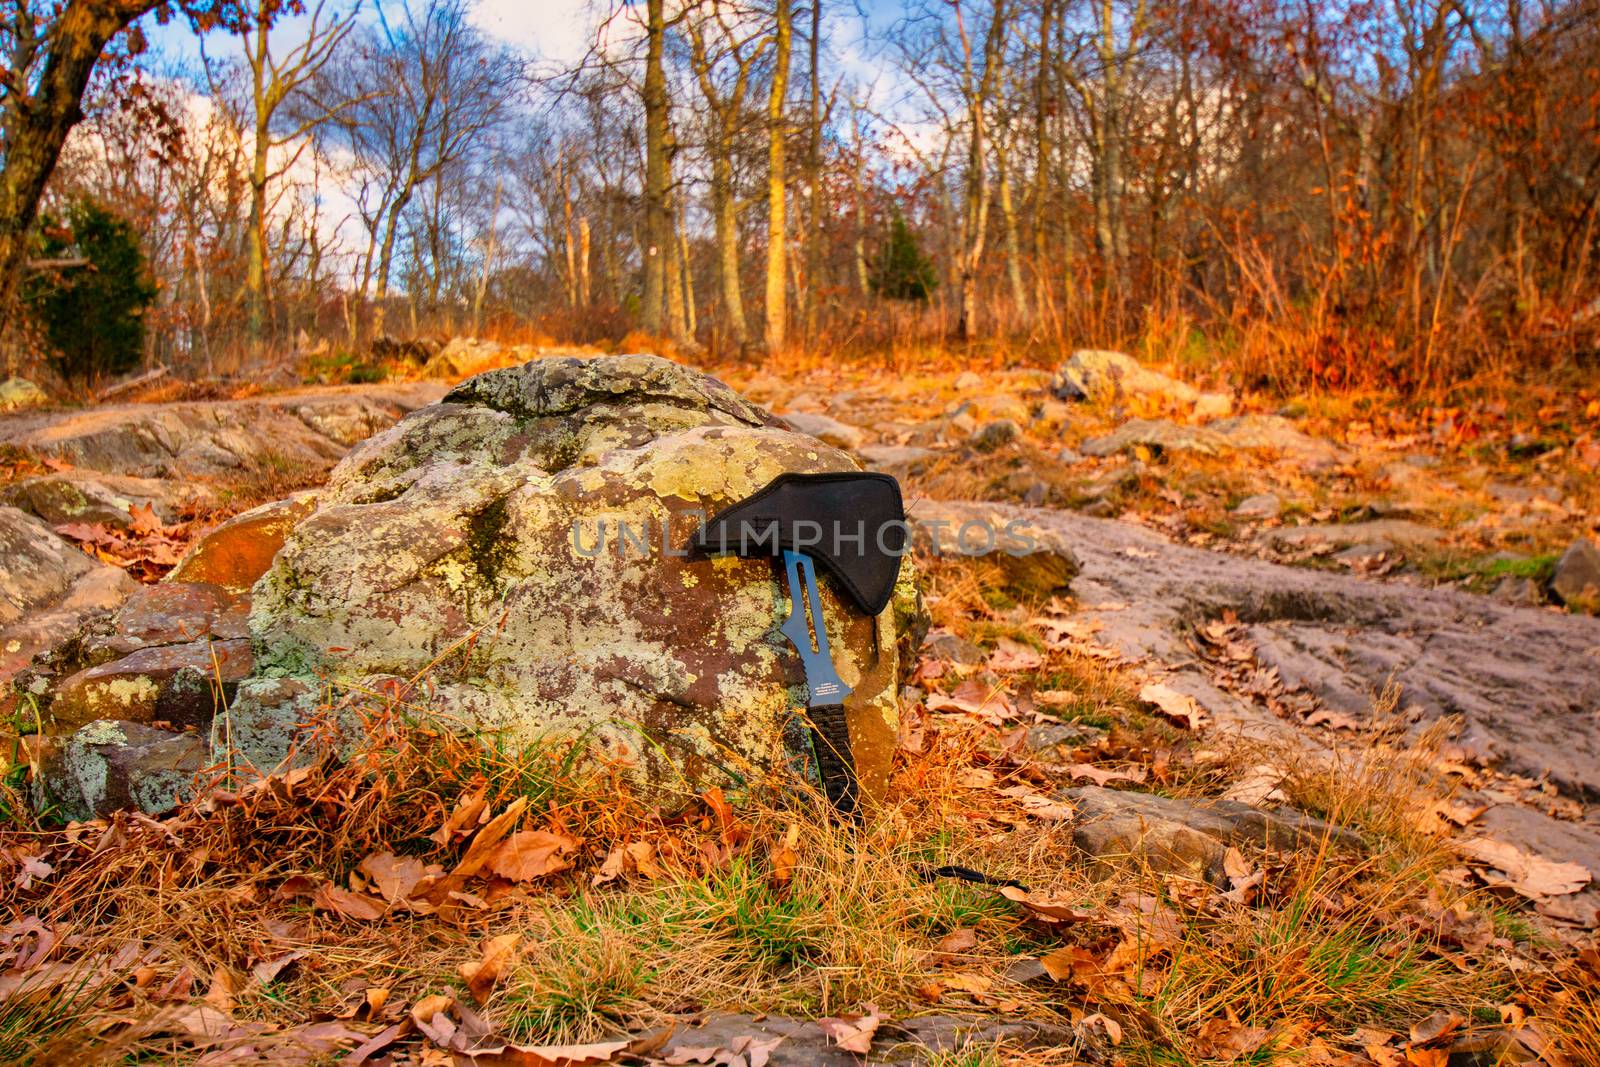 A Small Throwing Axe Leaning on a Rock in an Autumn Field